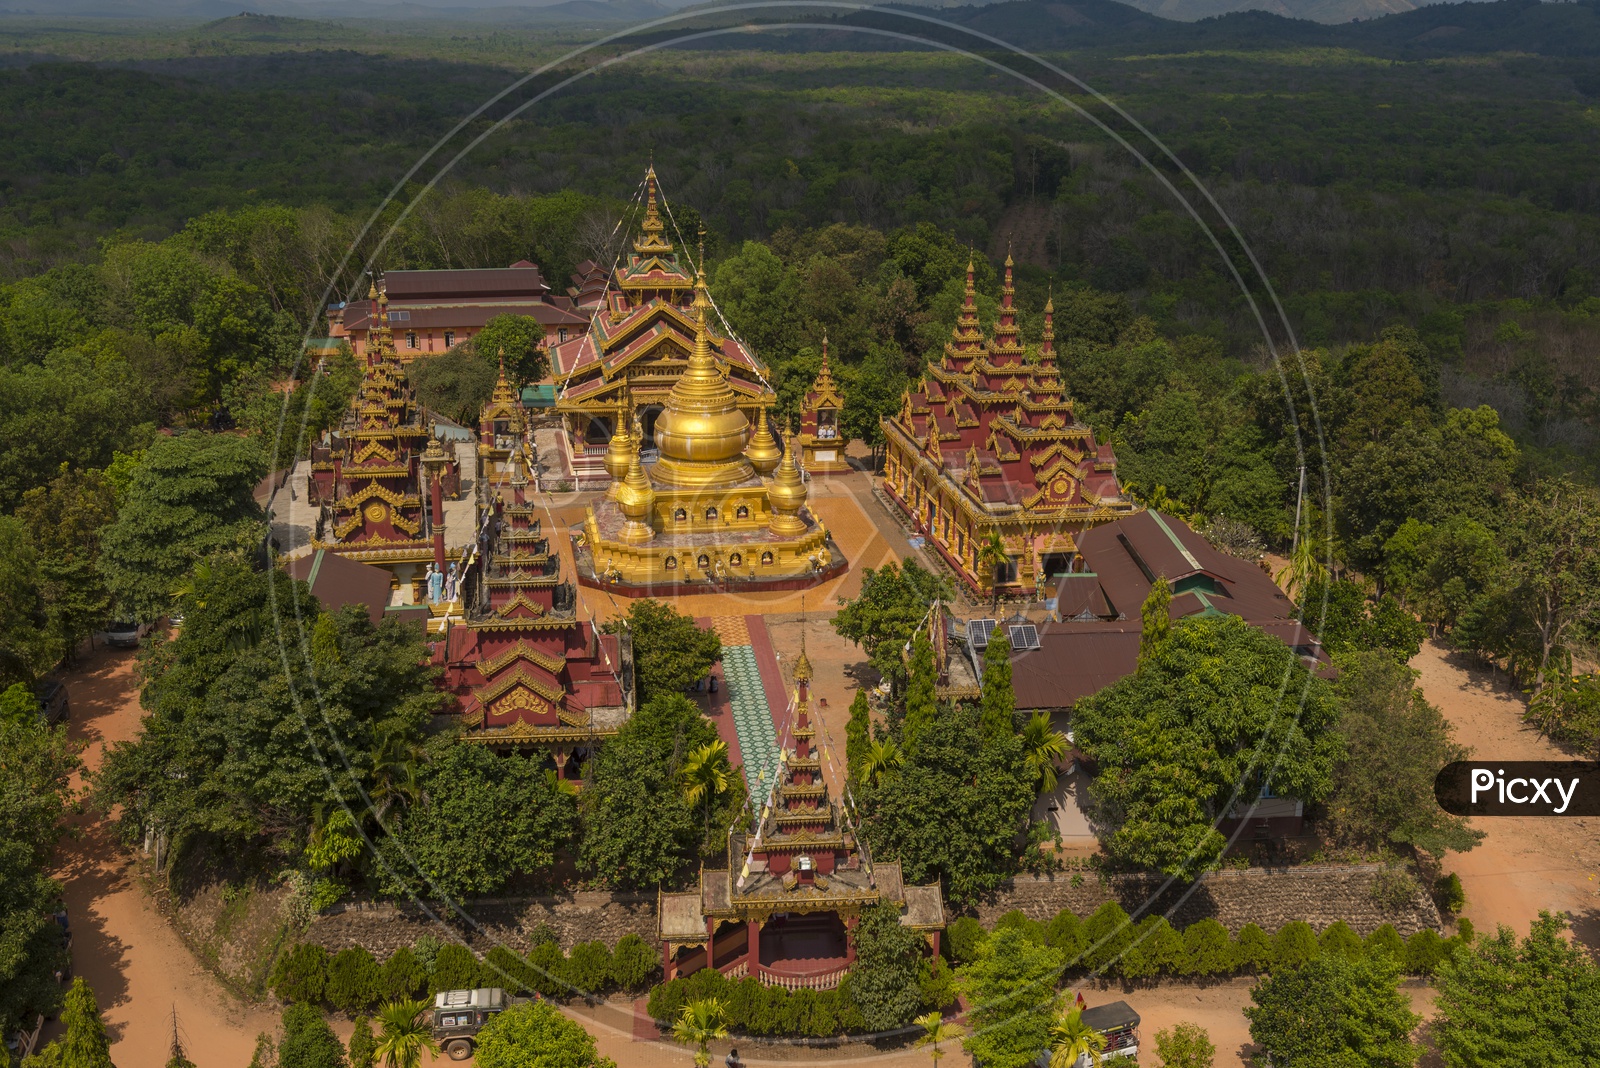 View of Burmese style temple Located in the Ye city of Burma.